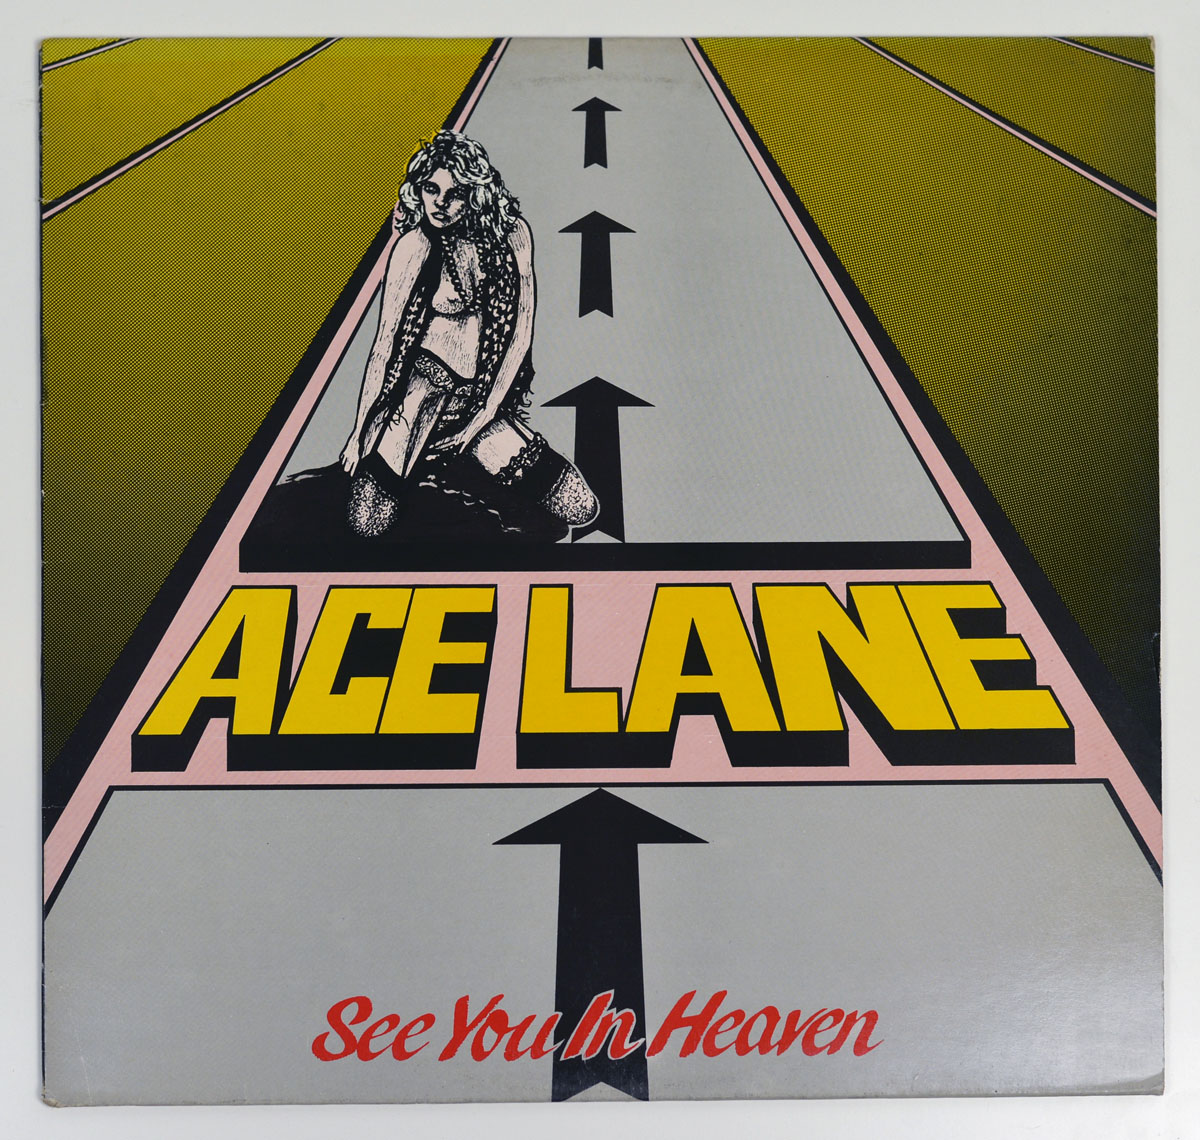 High Resolution Photos of ACE LANE - See You in Heaven NWOBHM 